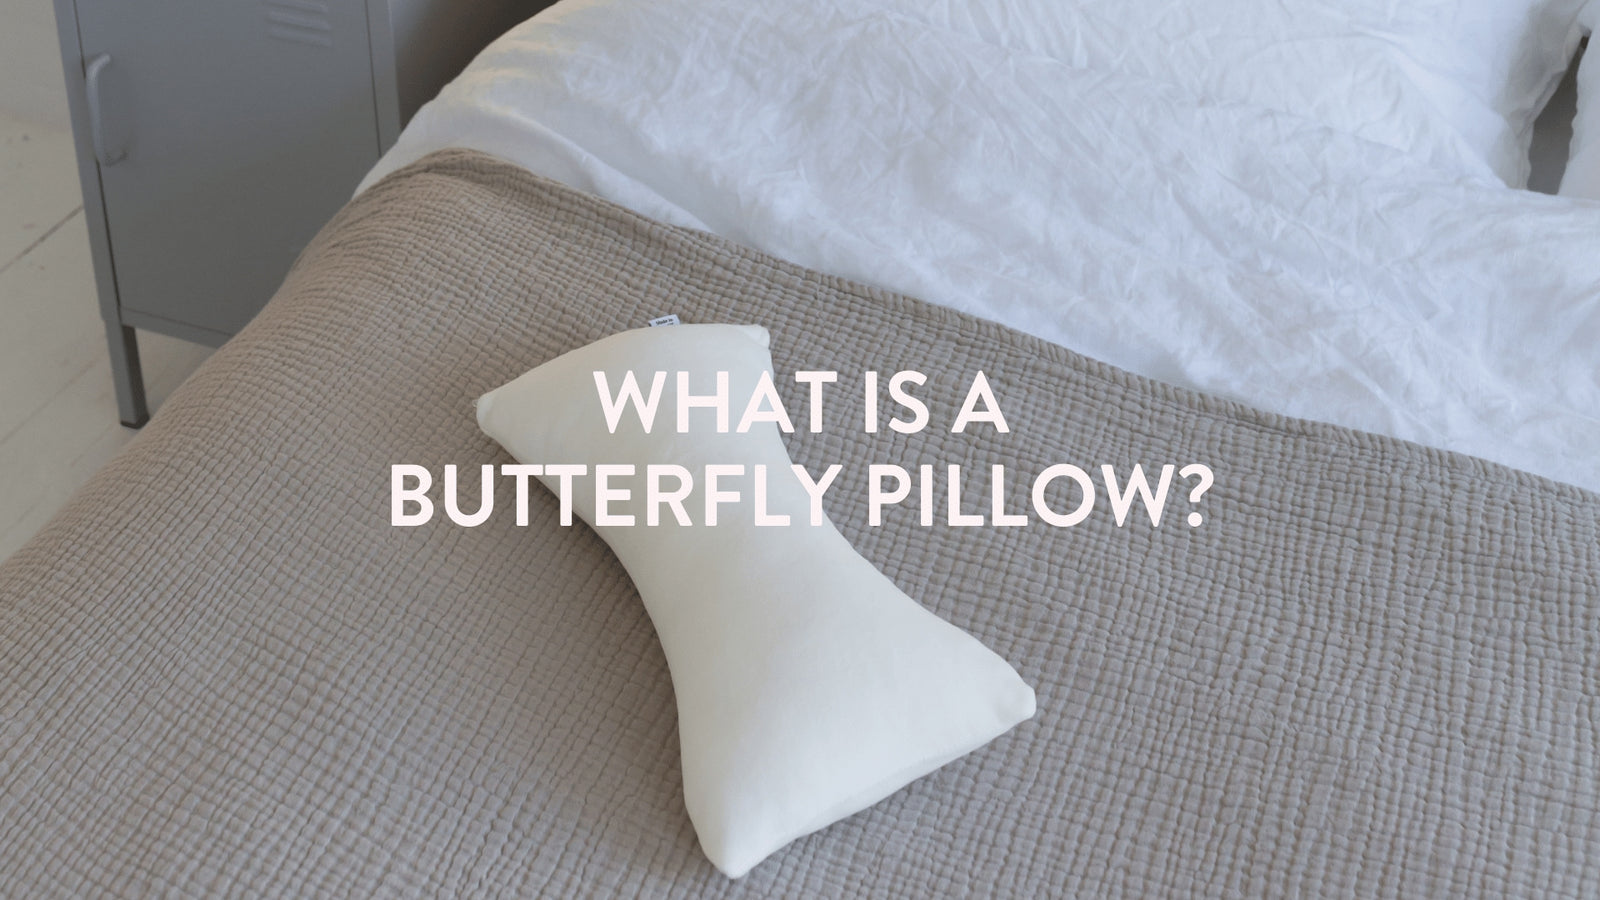 What is a butterfly pillow & how do you use one?